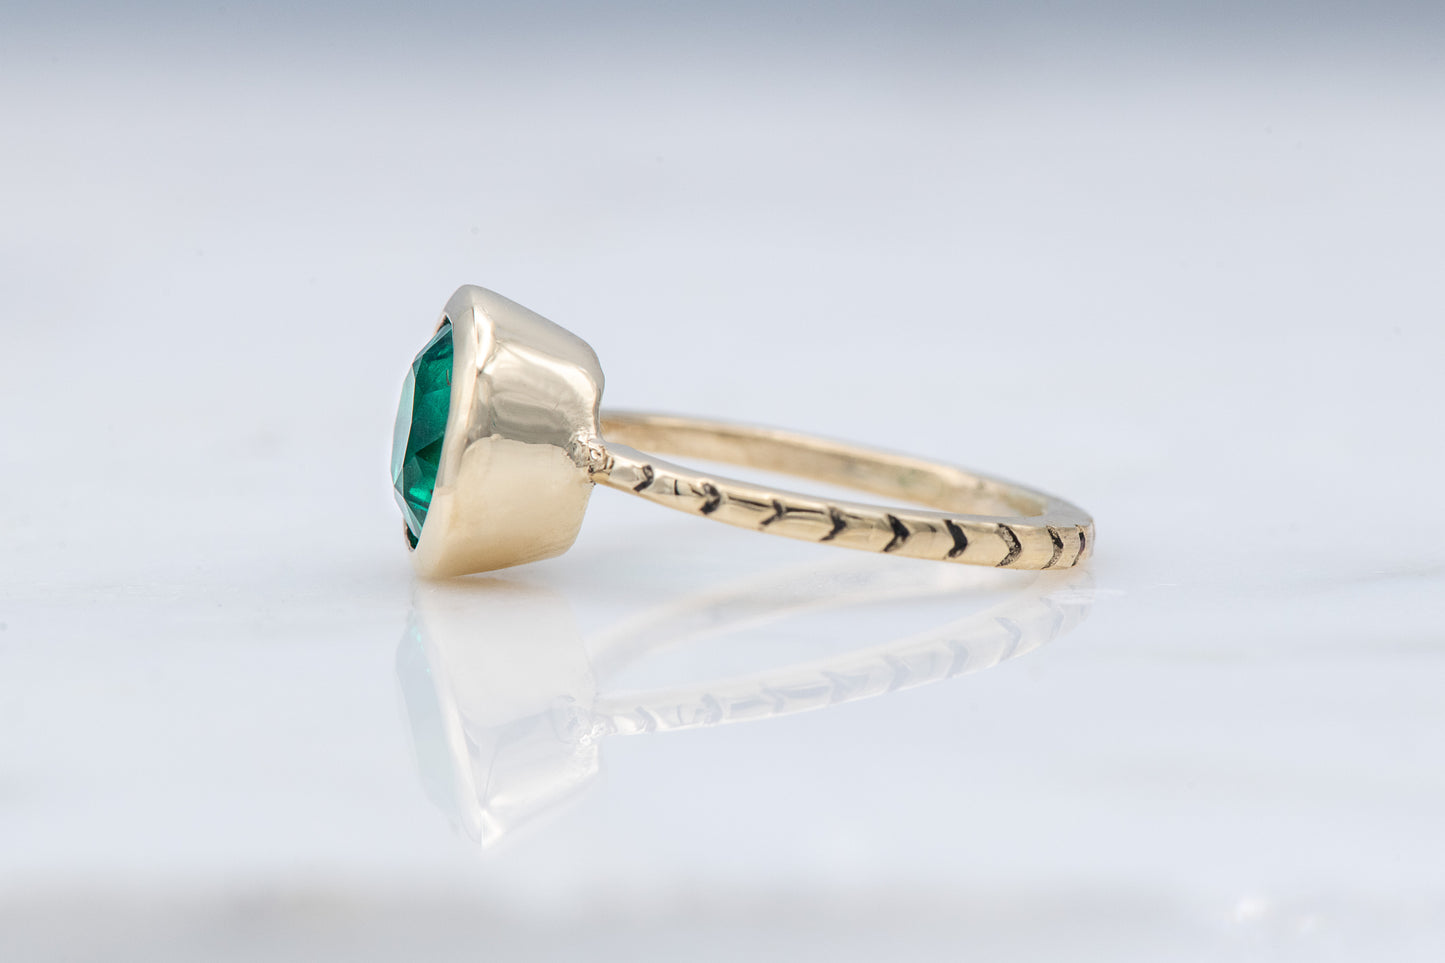 A Handmade Emerald and Yellow Gold Engagement Ring by Cassin Jewelry.